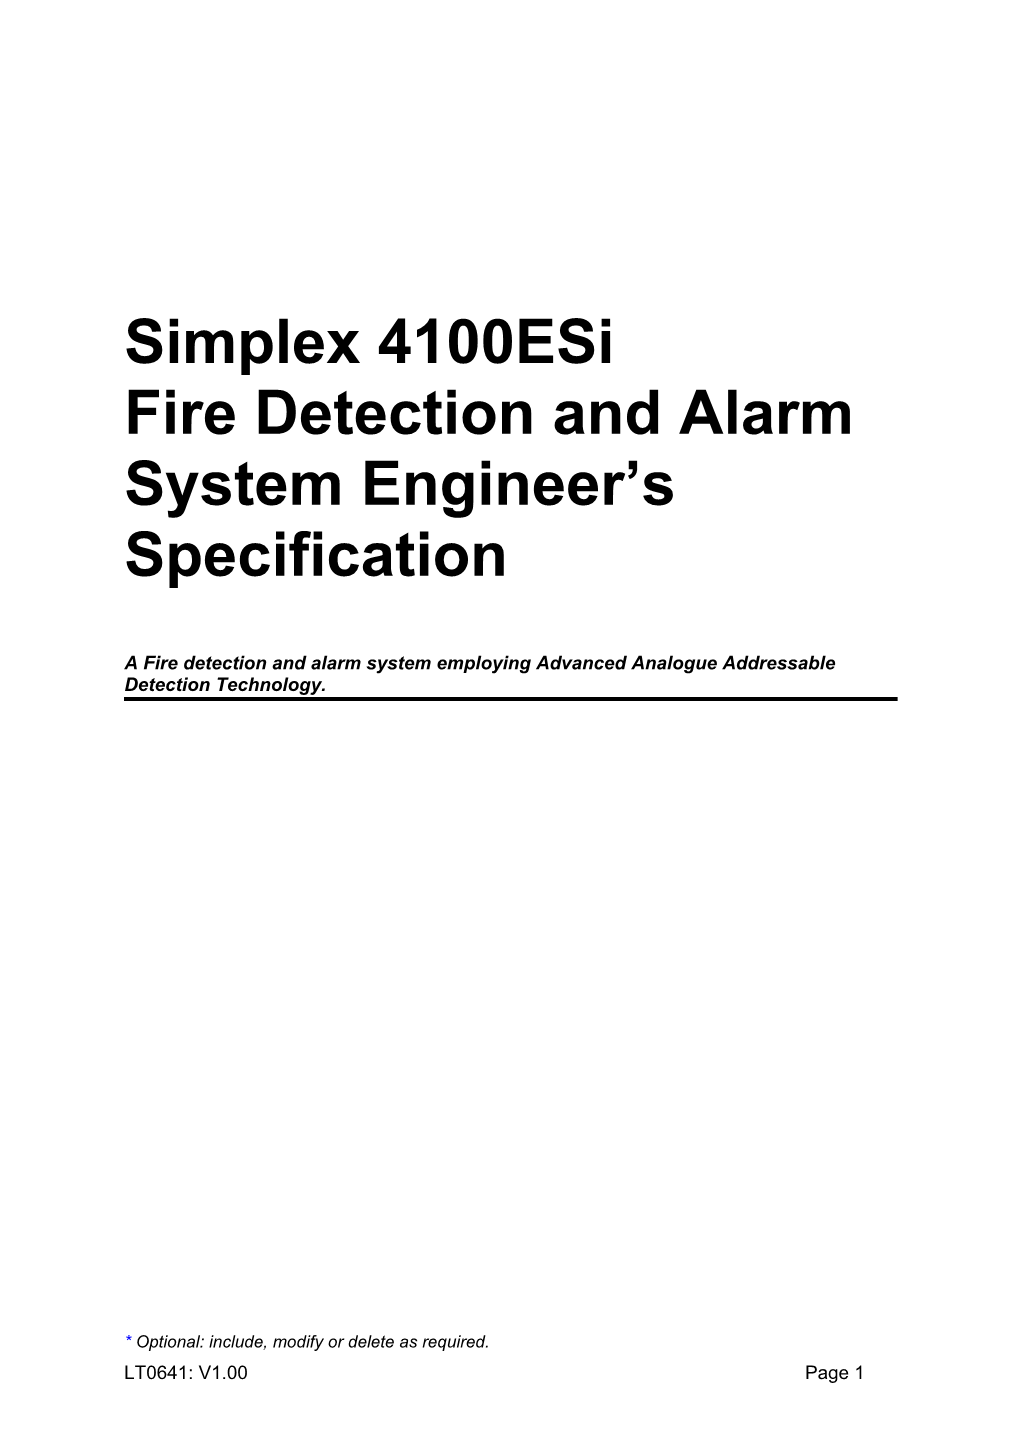 A Fire Detection and Alarm System Employing Advanced Analogue Addressable Detection Technology